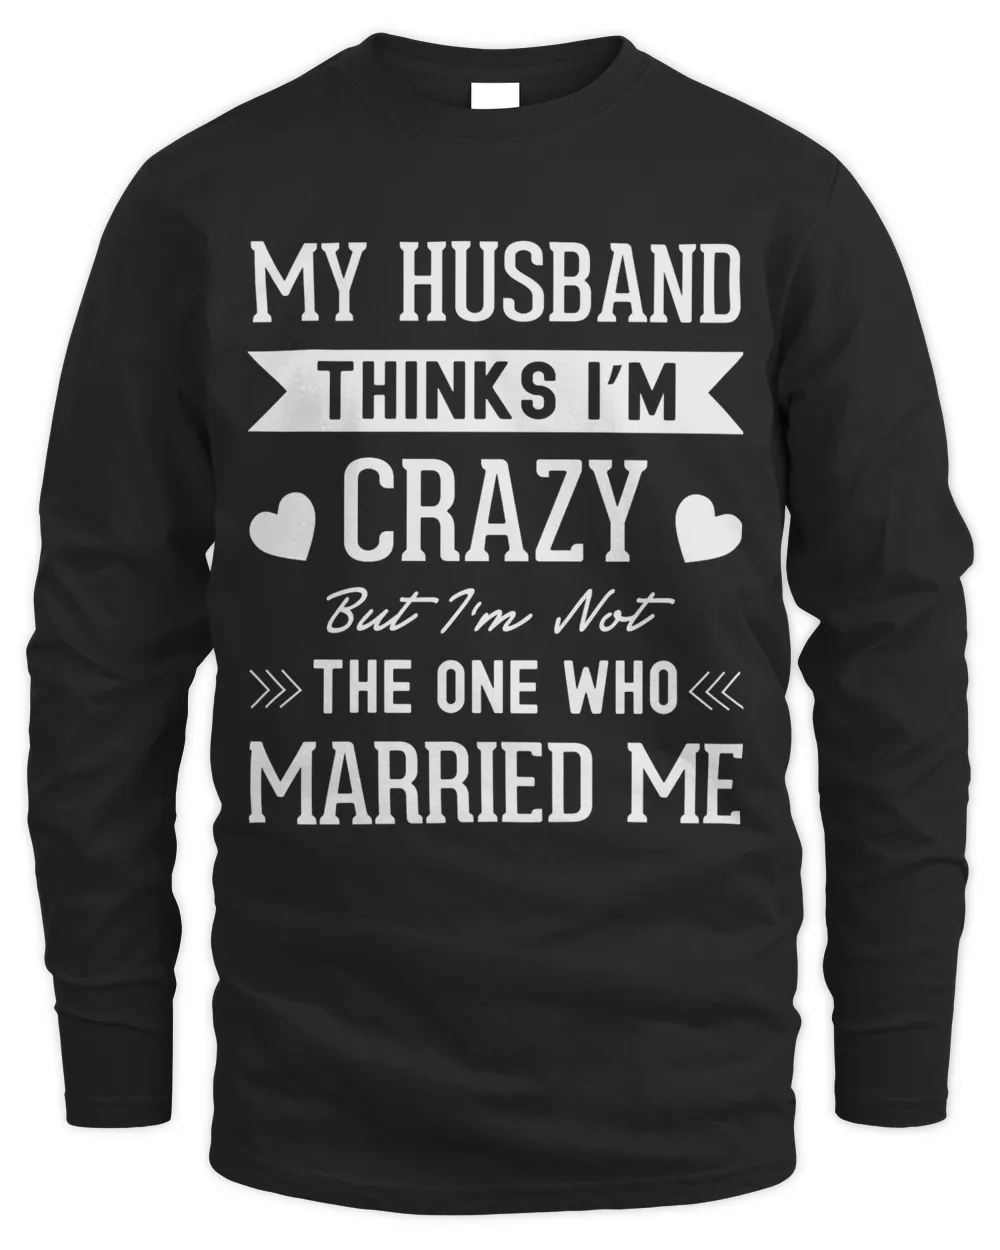 My husband thinks I'm crazy but I'm not the one who married me